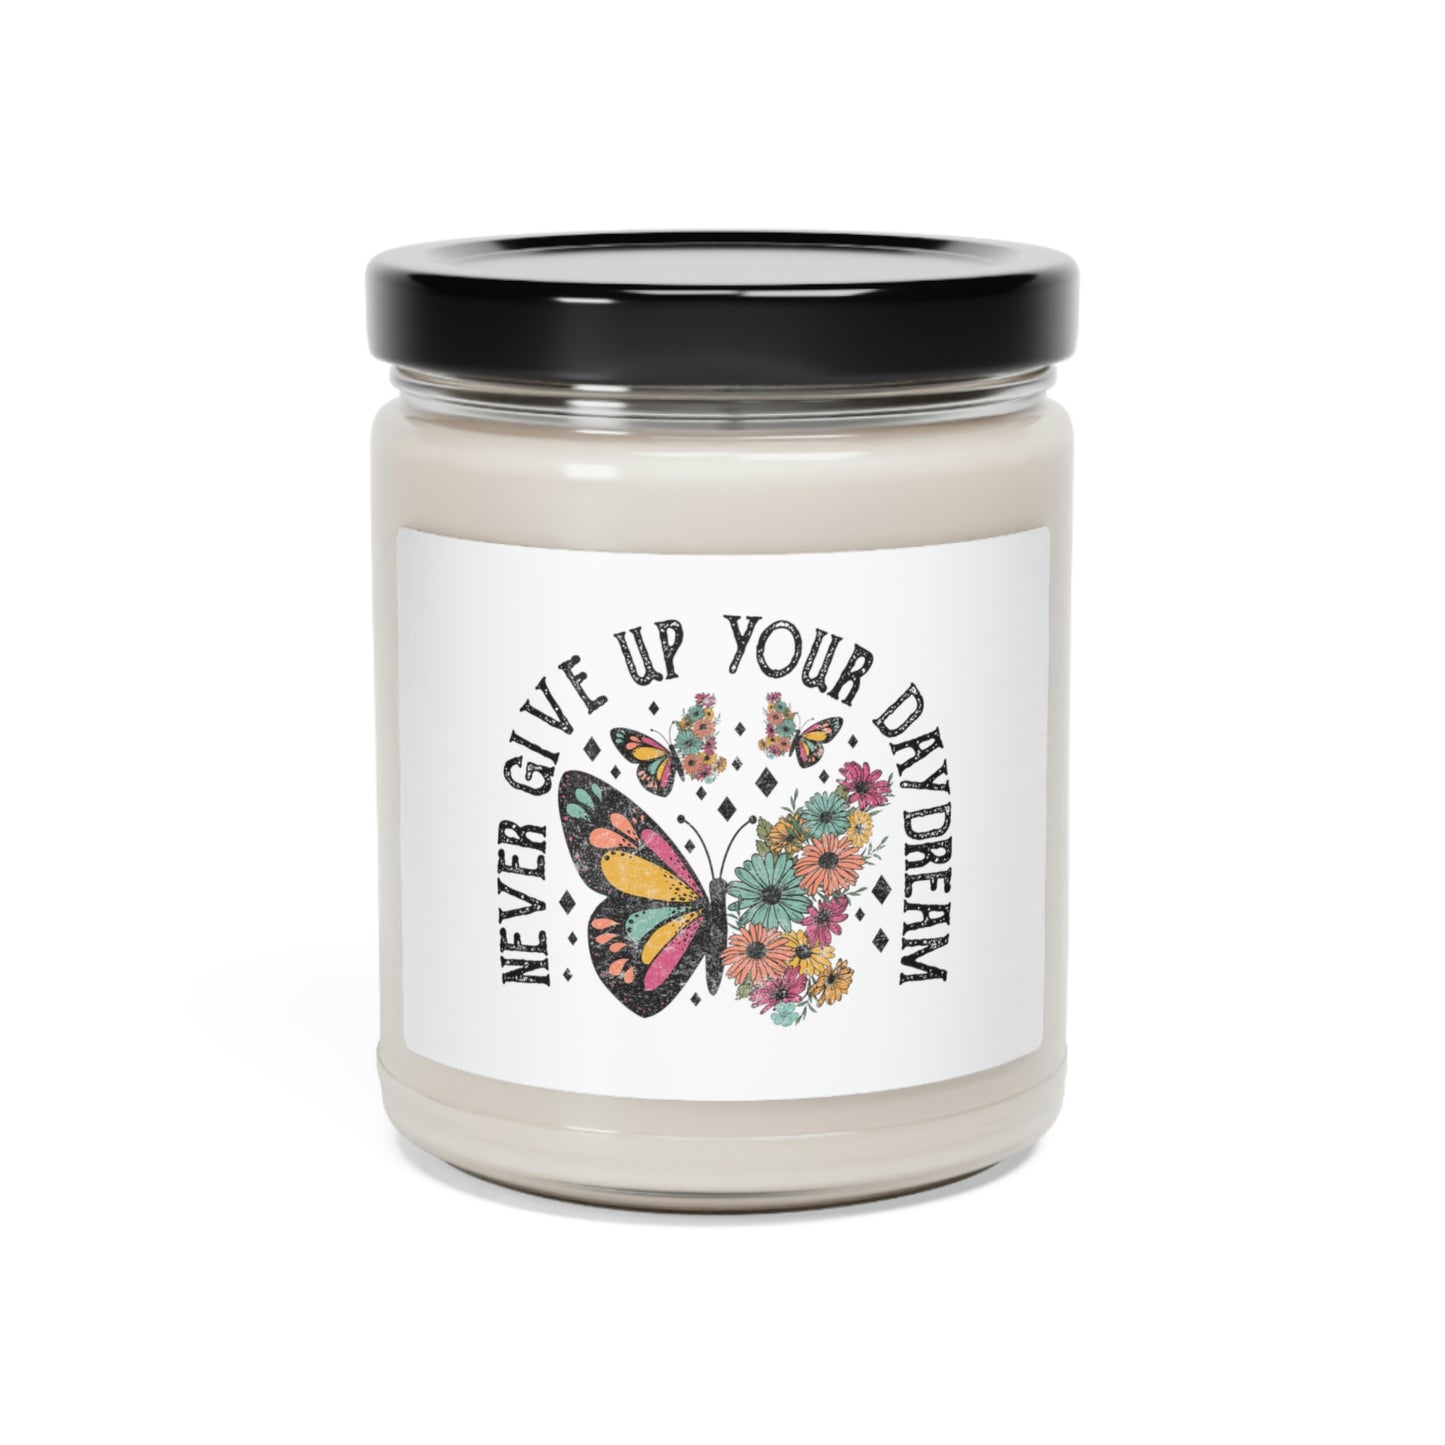 Never give up your day dream Scented Soy Candle, 9oz - Clean Cotton / 9oz